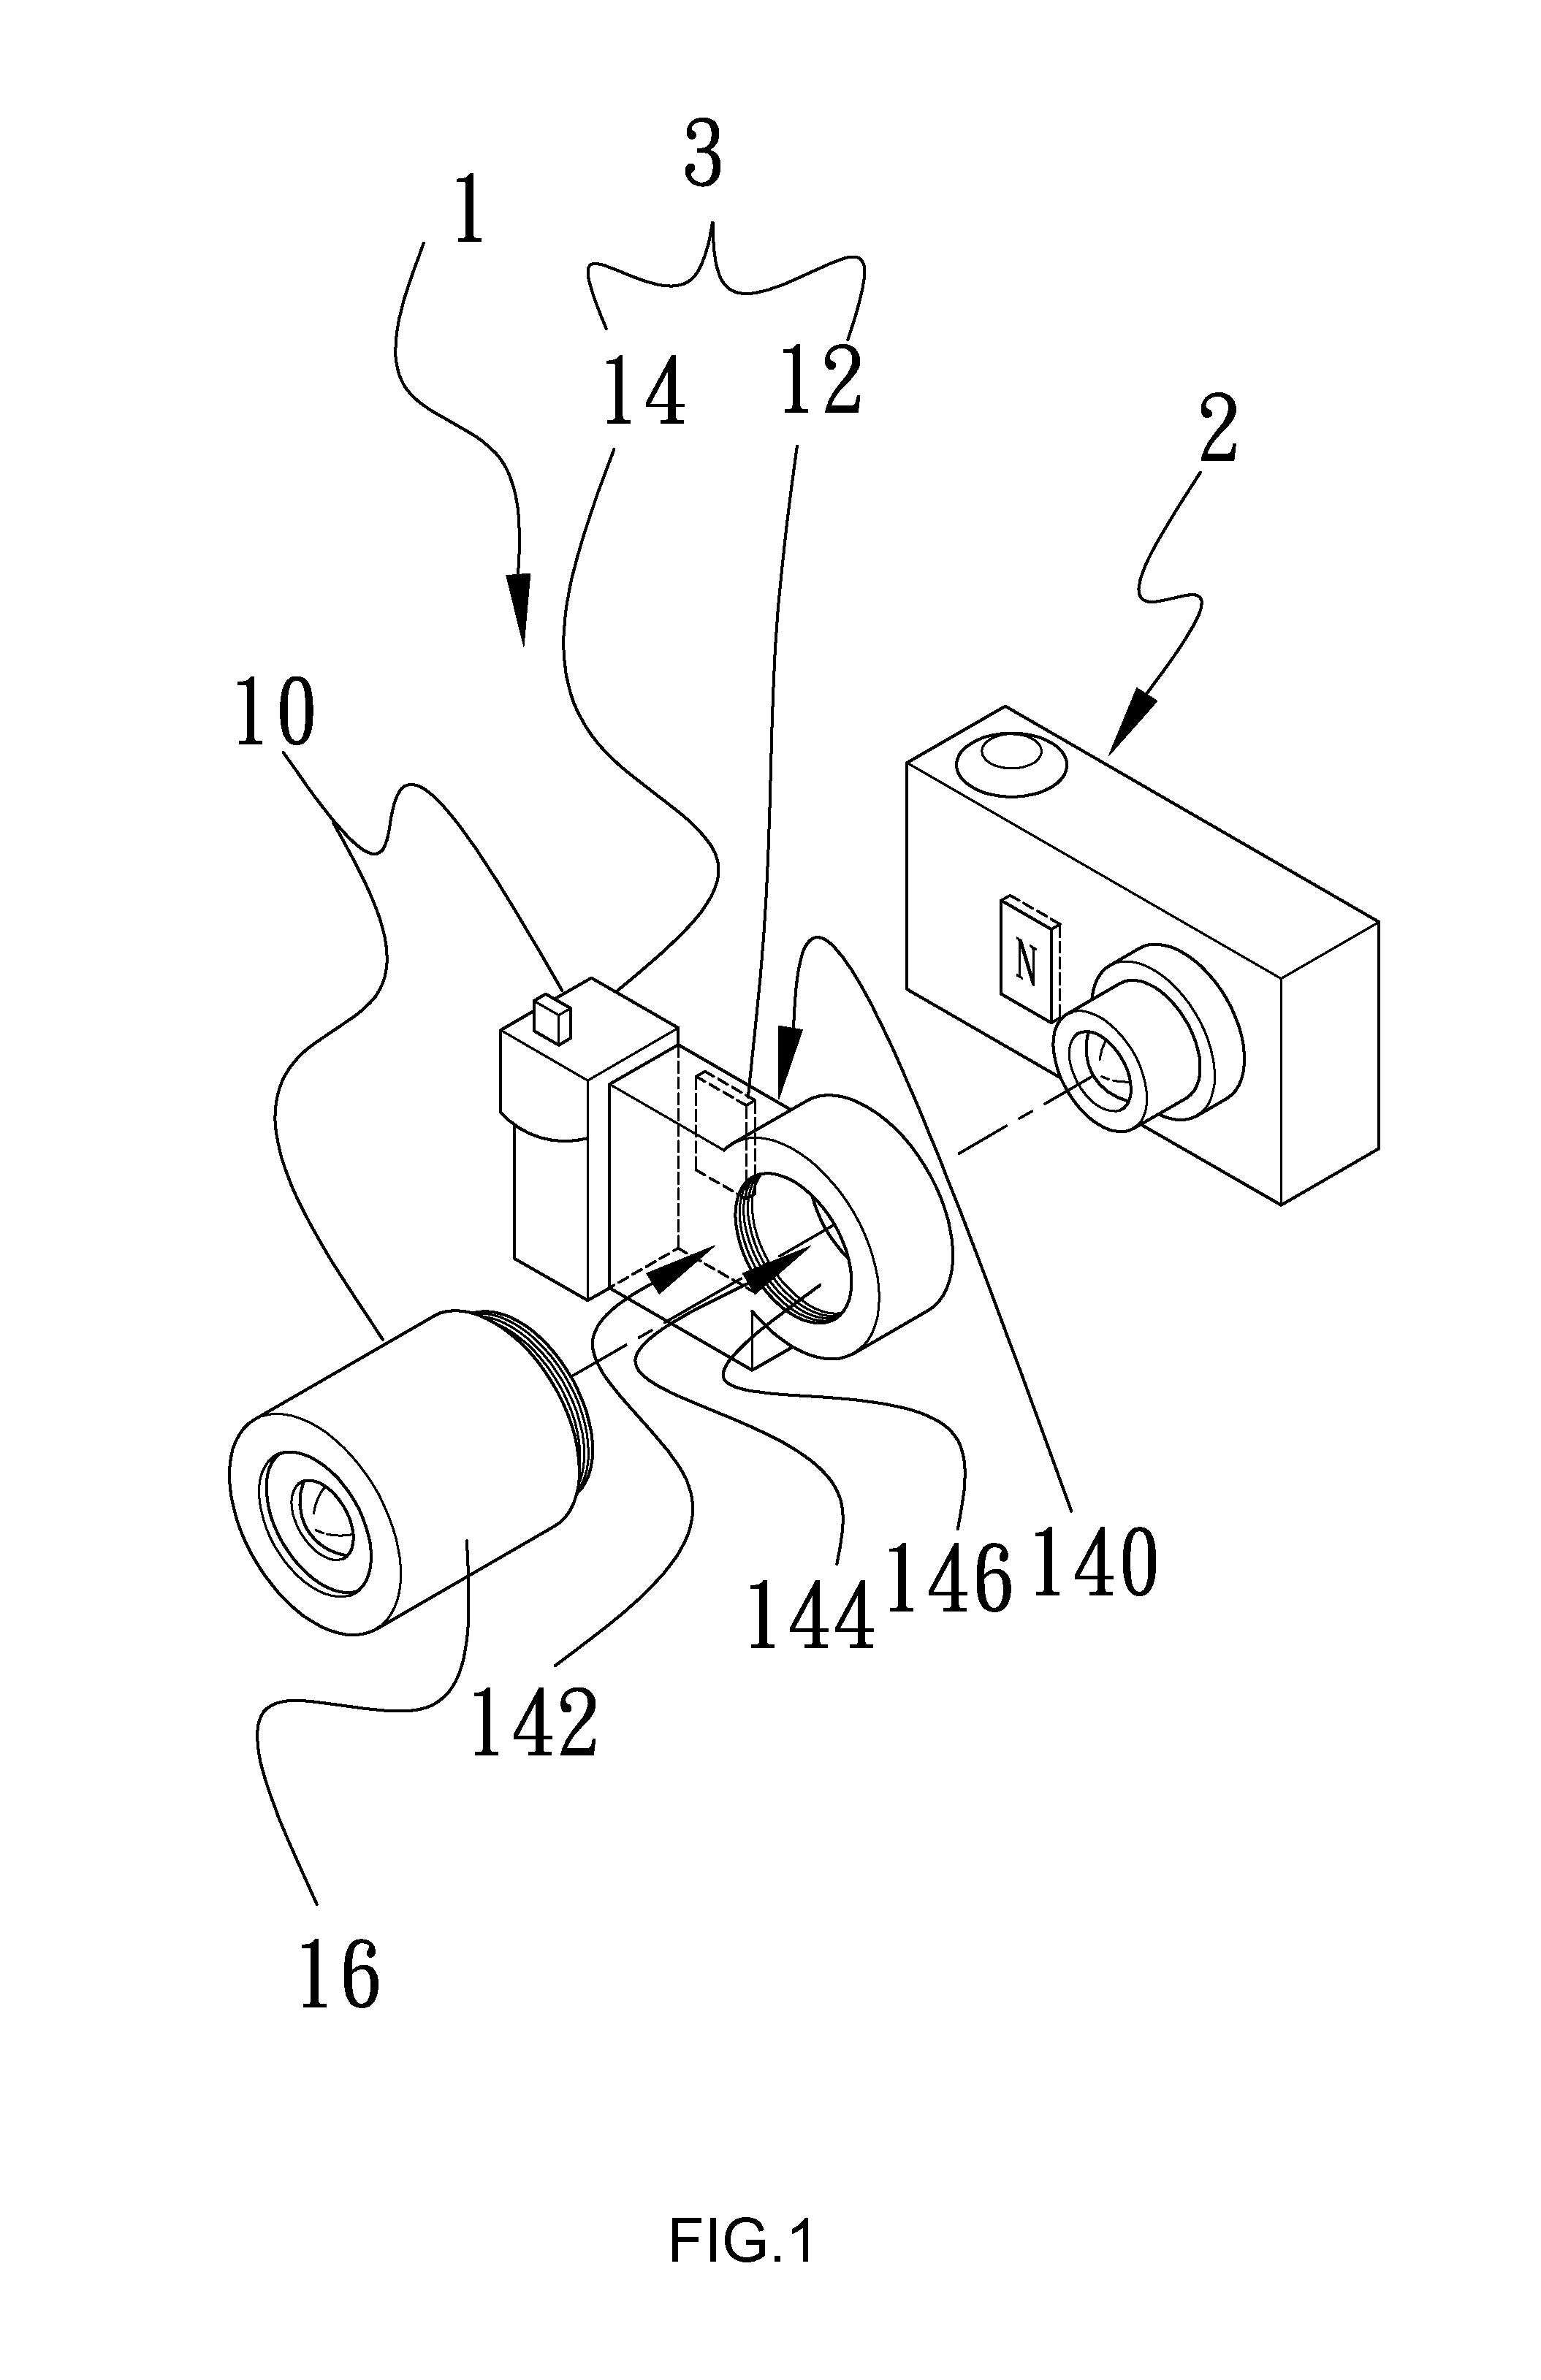 Lens connection module and connection adapter for same